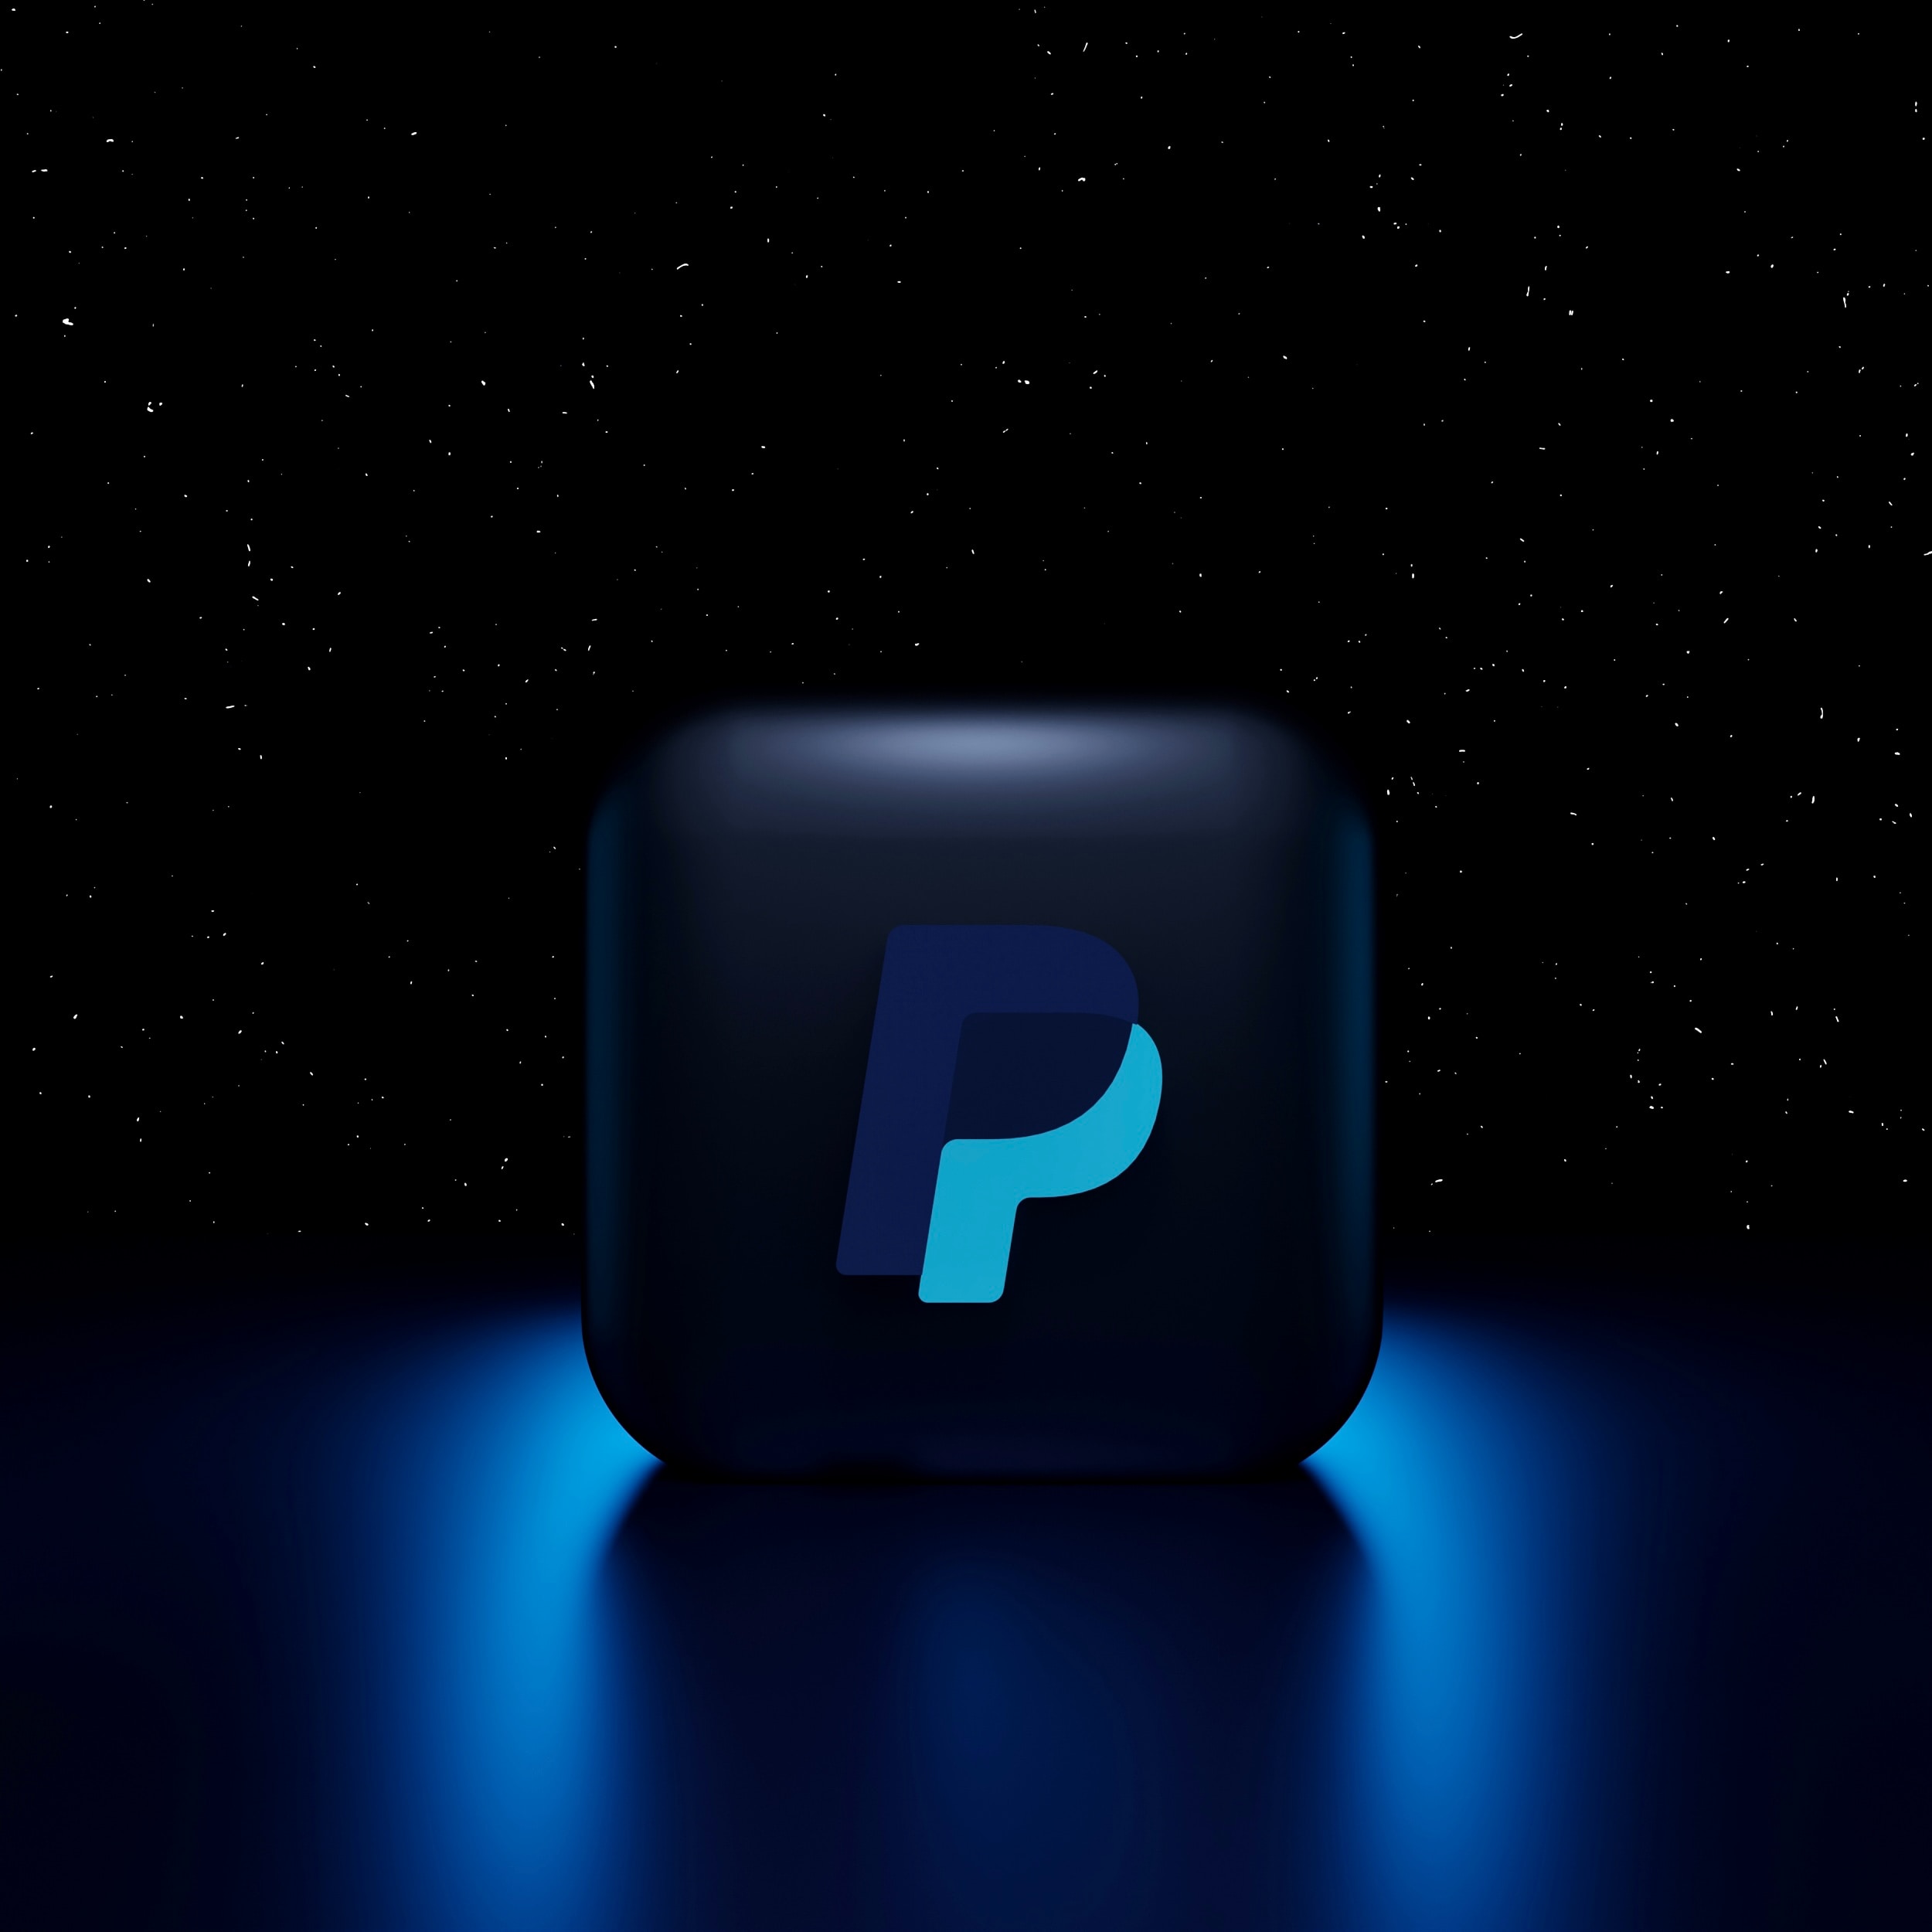 US Congresswoman Raises Concerns About Paypal Stablecoin In The Absence Of Regulation